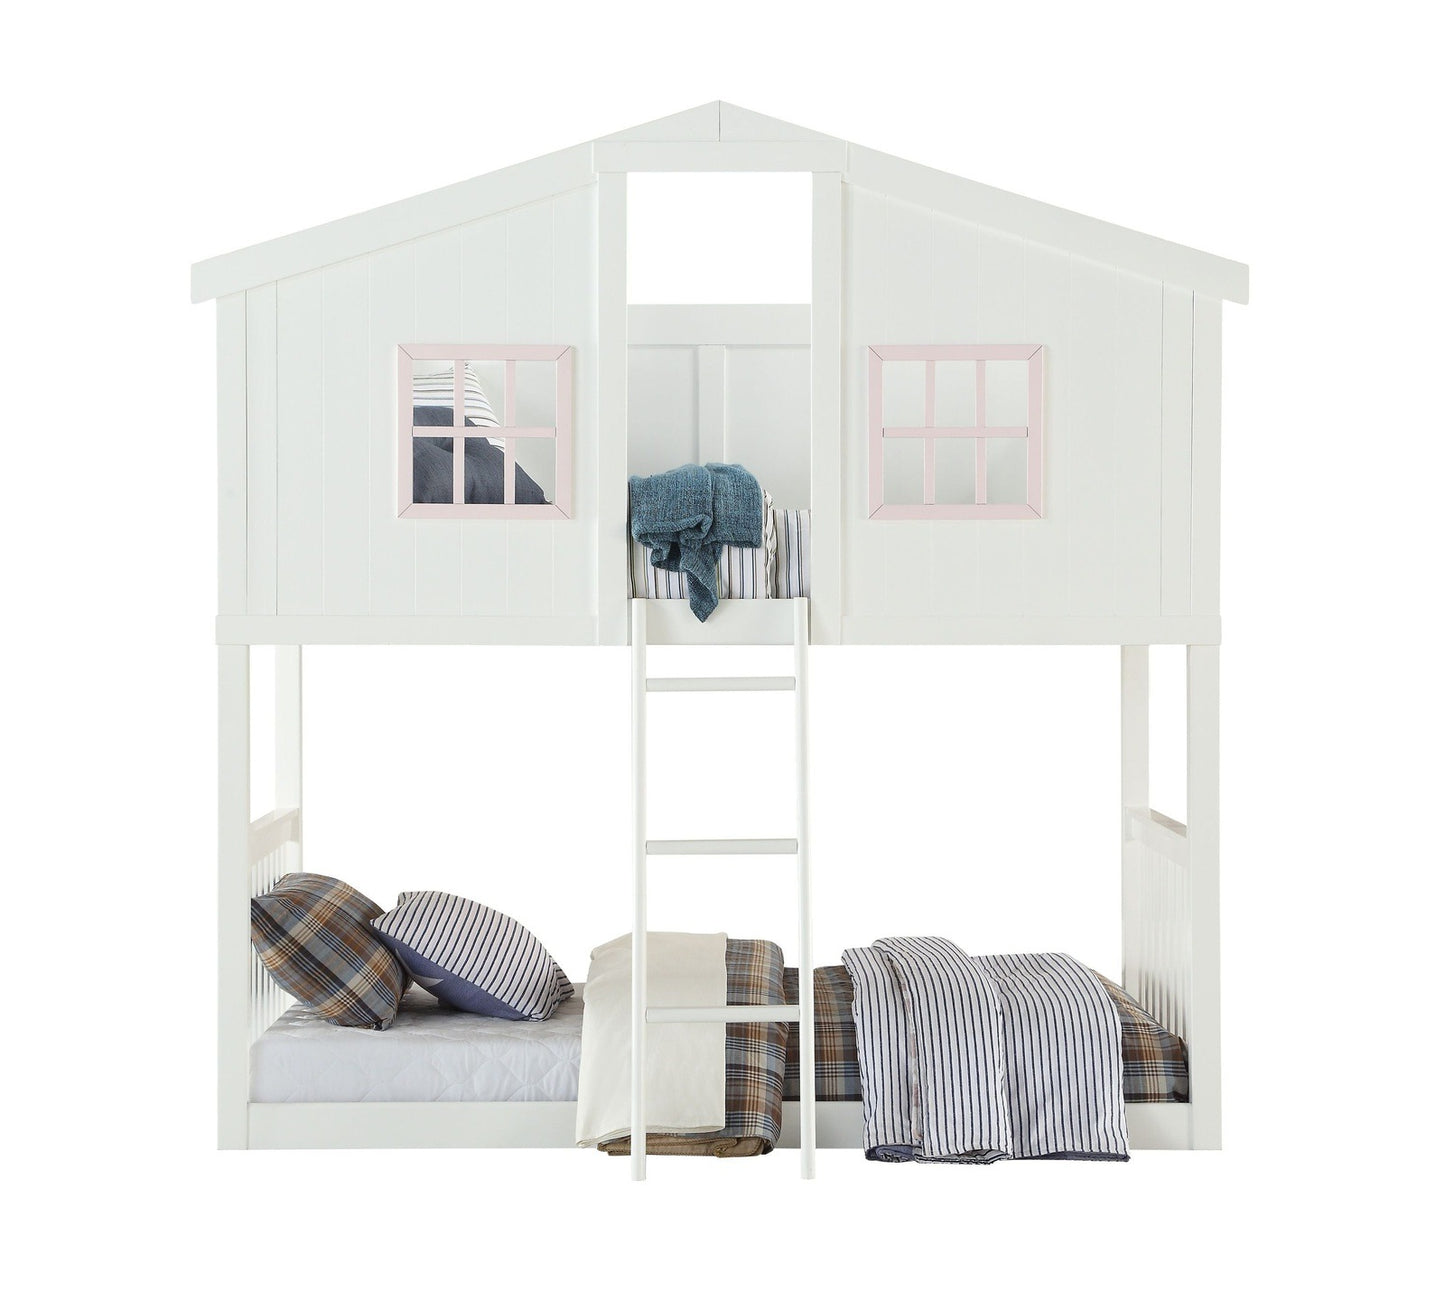 ACME Rohan Cottage Bunk Bed Twin/Twin , White & Pink 1Set/2Ctn 37410